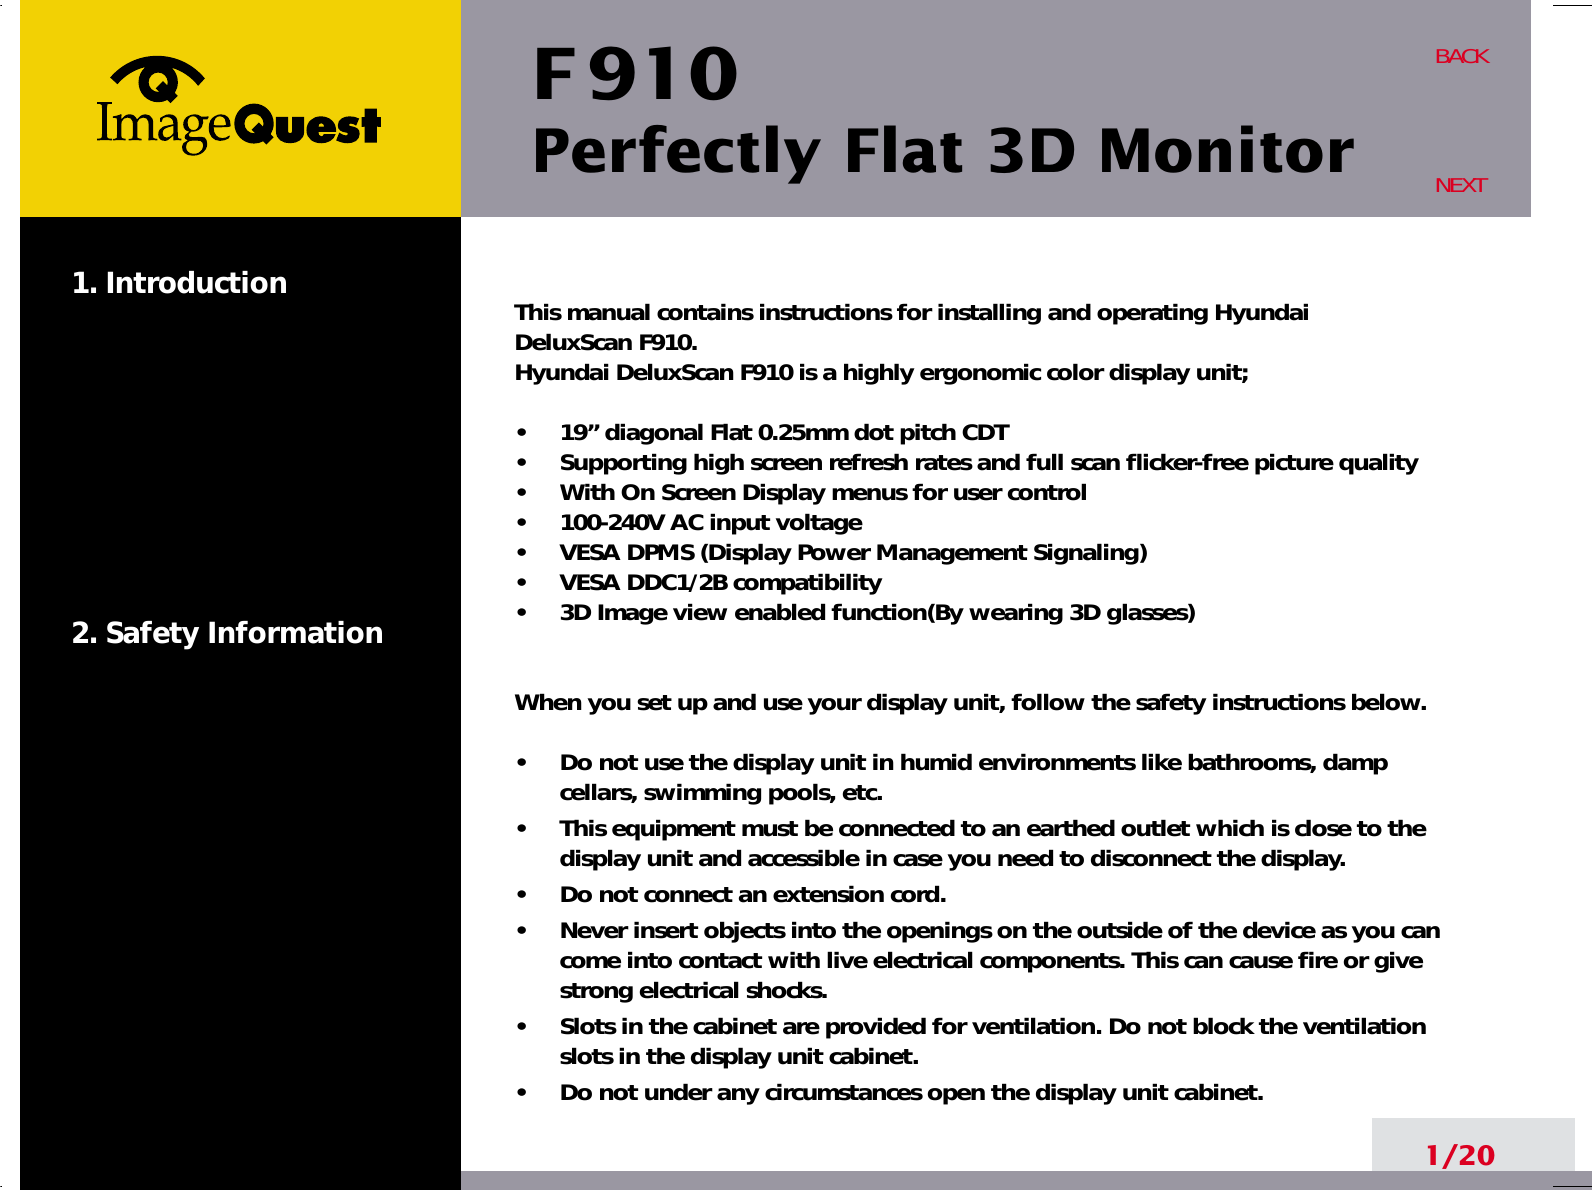 F 910Perfectly Flat 3D Monitor1. Introduction2. Safety Information1/20BACKNEXTThis manual contains instructions for installing and operating Hyundai DeluxScan F910. Hyundai DeluxScan F910 is a highly ergonomic color display unit; •     19” diagonal Flat 0.25mm dot pitch CDT  •     Supporting high screen refresh rates and full scan flicker-free picture quality•     With On Screen Display menus for user control•     100-240V AC input voltage•     VESA DPMS (Display Power Management Signaling)•     VESA DDC1/2B compatibility•     3D Image view enabled function(By wearing 3D glasses)When you set up and use your display unit, follow the safety instructions below.•     Do not use the display unit in humid environments like bathrooms, dampcellars, swimming pools, etc.•     This equipment must be connected to an earthed outlet which is close to thedisplay unit and accessible in case you need to disconnect the display.•     Do not connect an extension cord.•     Never insert objects into the openings on the outside of the device as you cancome into contact with live electrical components. This can cause fire or givestrong electrical shocks.•     Slots in the cabinet are provided for ventilation. Do not block the ventilationslots in the display unit cabinet.•     Do not under any circumstances open the display unit cabinet.